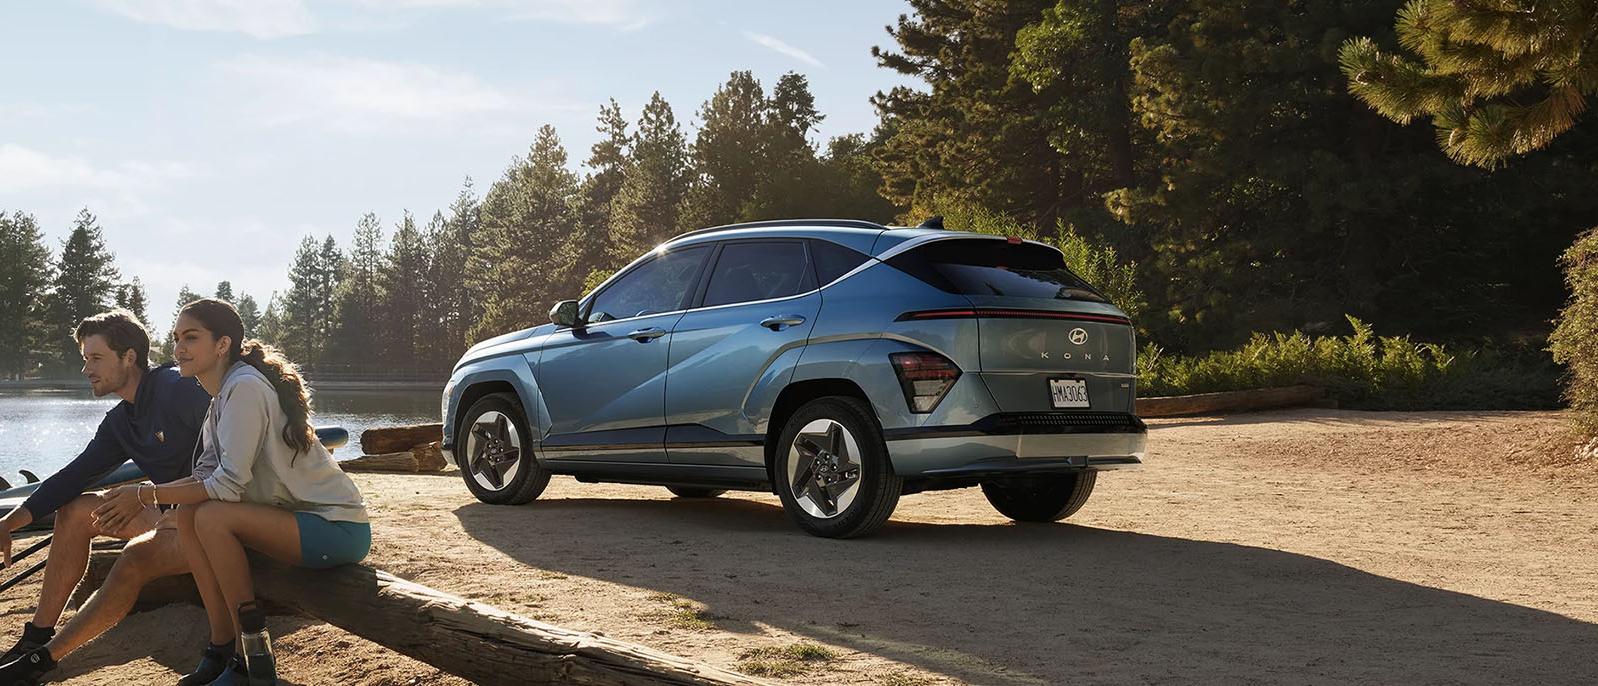 A  Hyundai Kona Electric parked in nature.